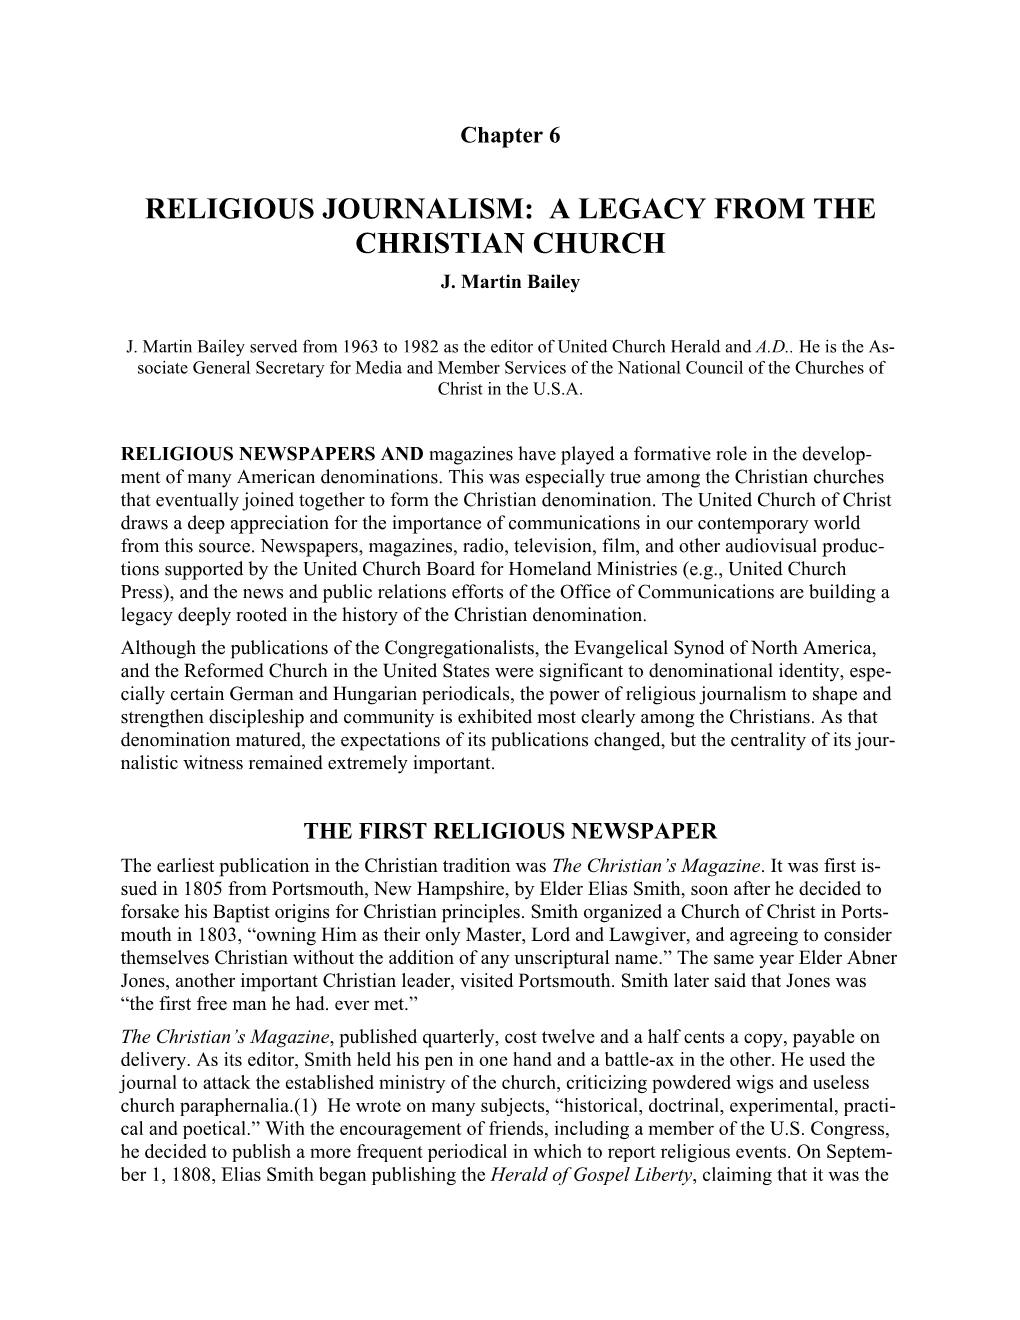 Religious Journalism: a Legacy from the Christian Church J